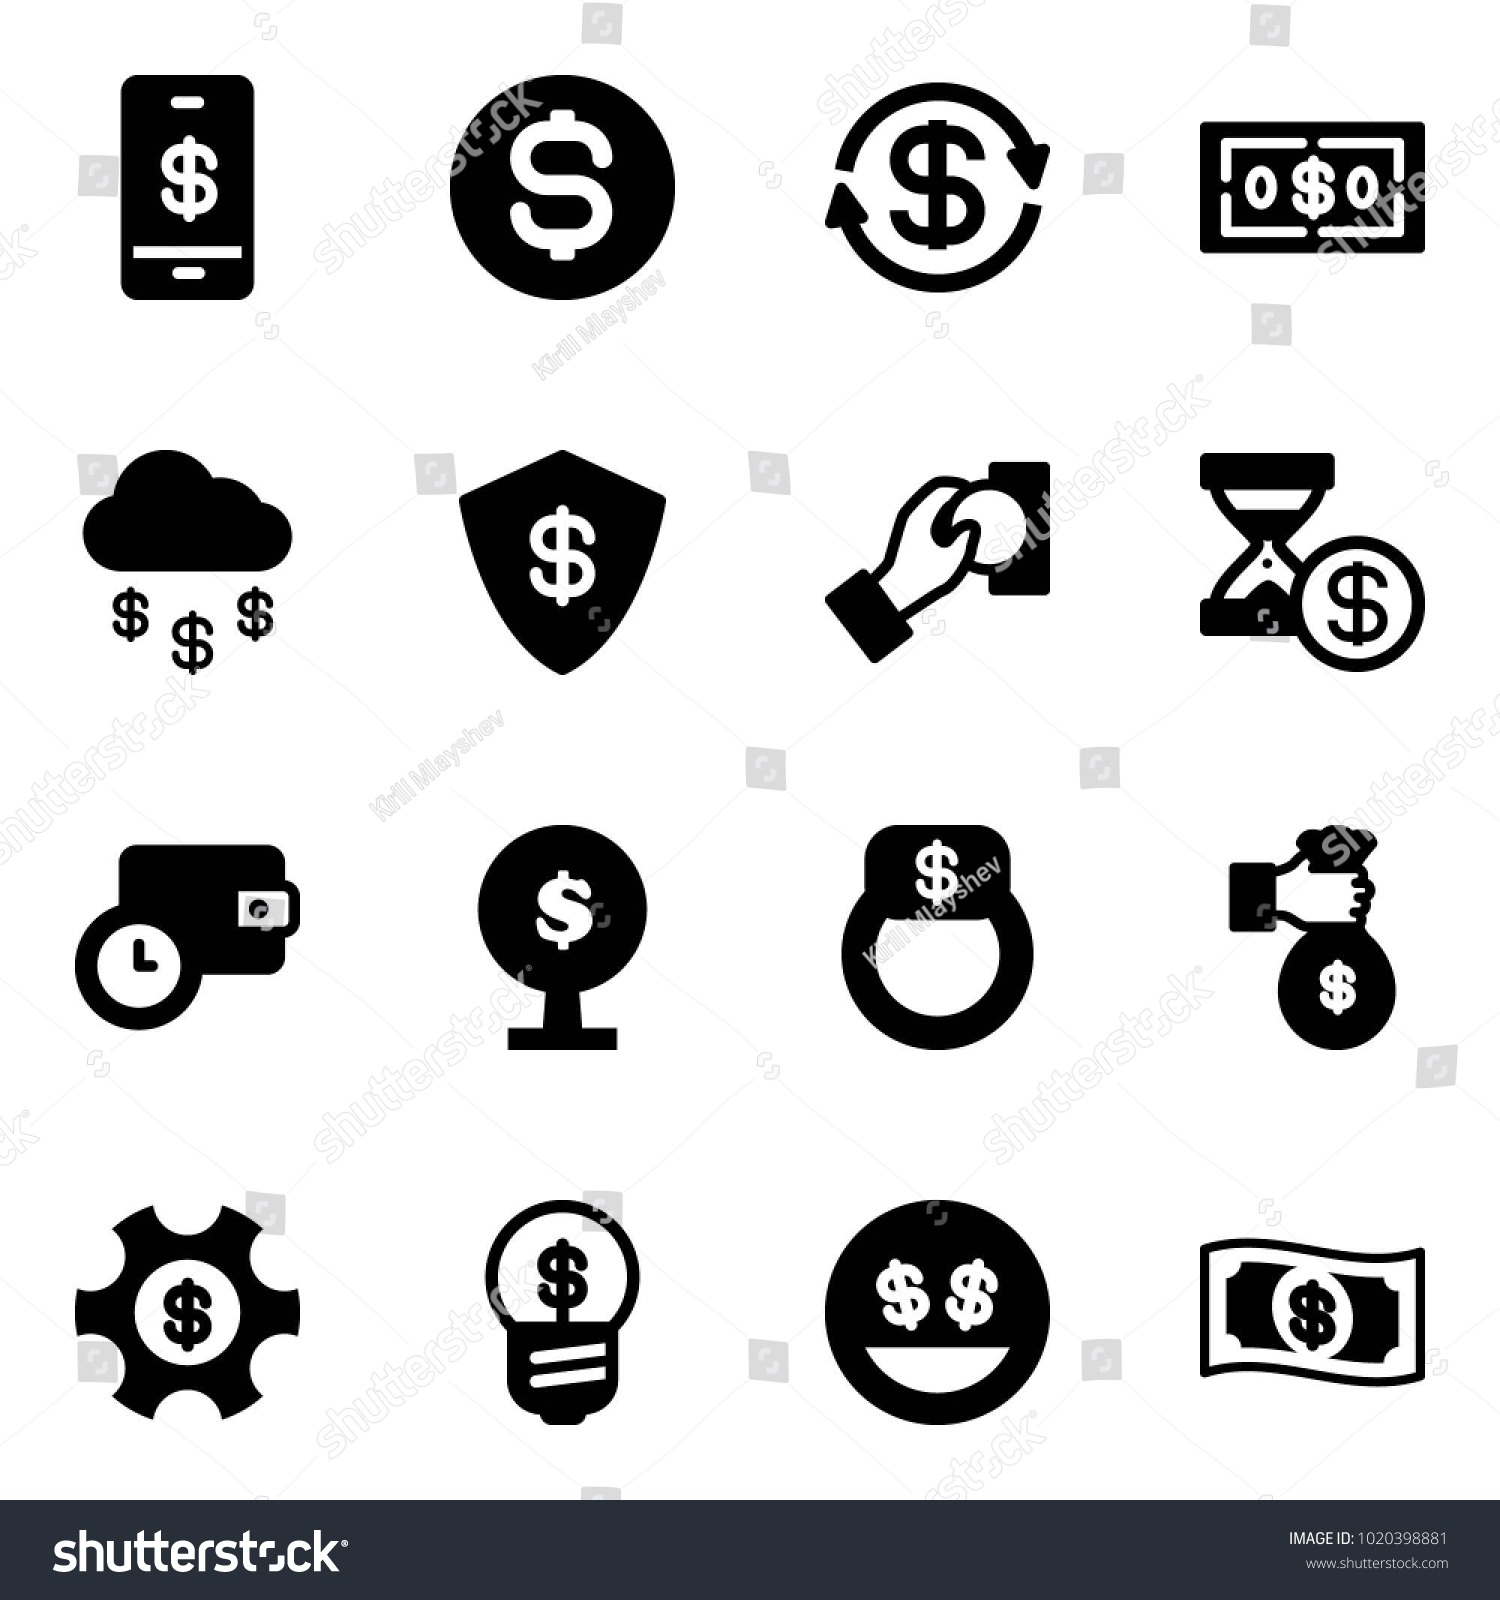 Solid vector icon set - mobile payment vector, dollar coin, exchange, money rain, safe, cash pay, account history, wallet time, tree, finger ring, rich, managemet, business idea, smile #1020398881